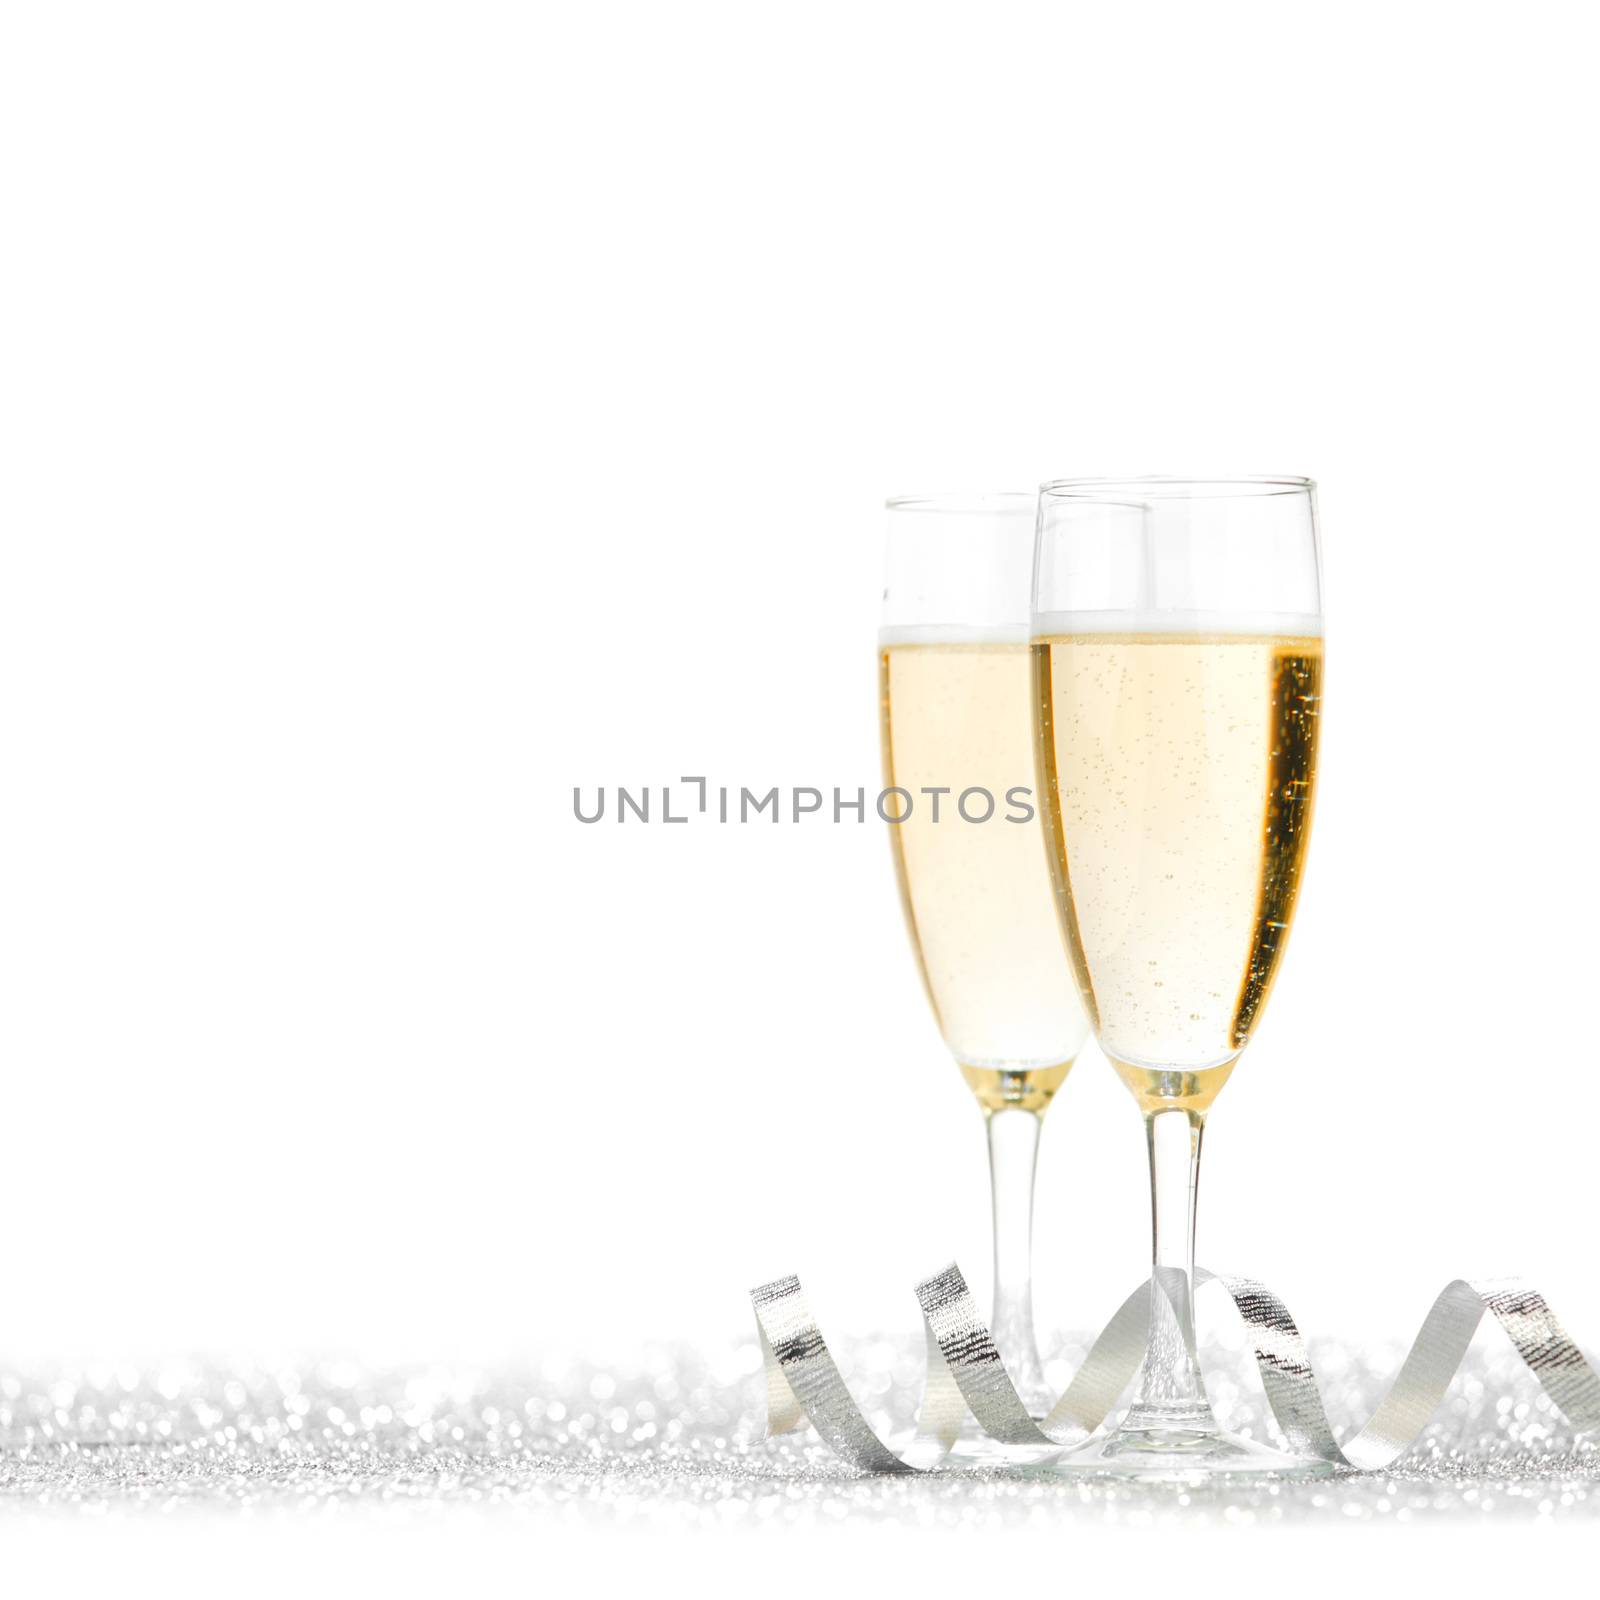 Glasses of champagne and silver ribbons on glitter background